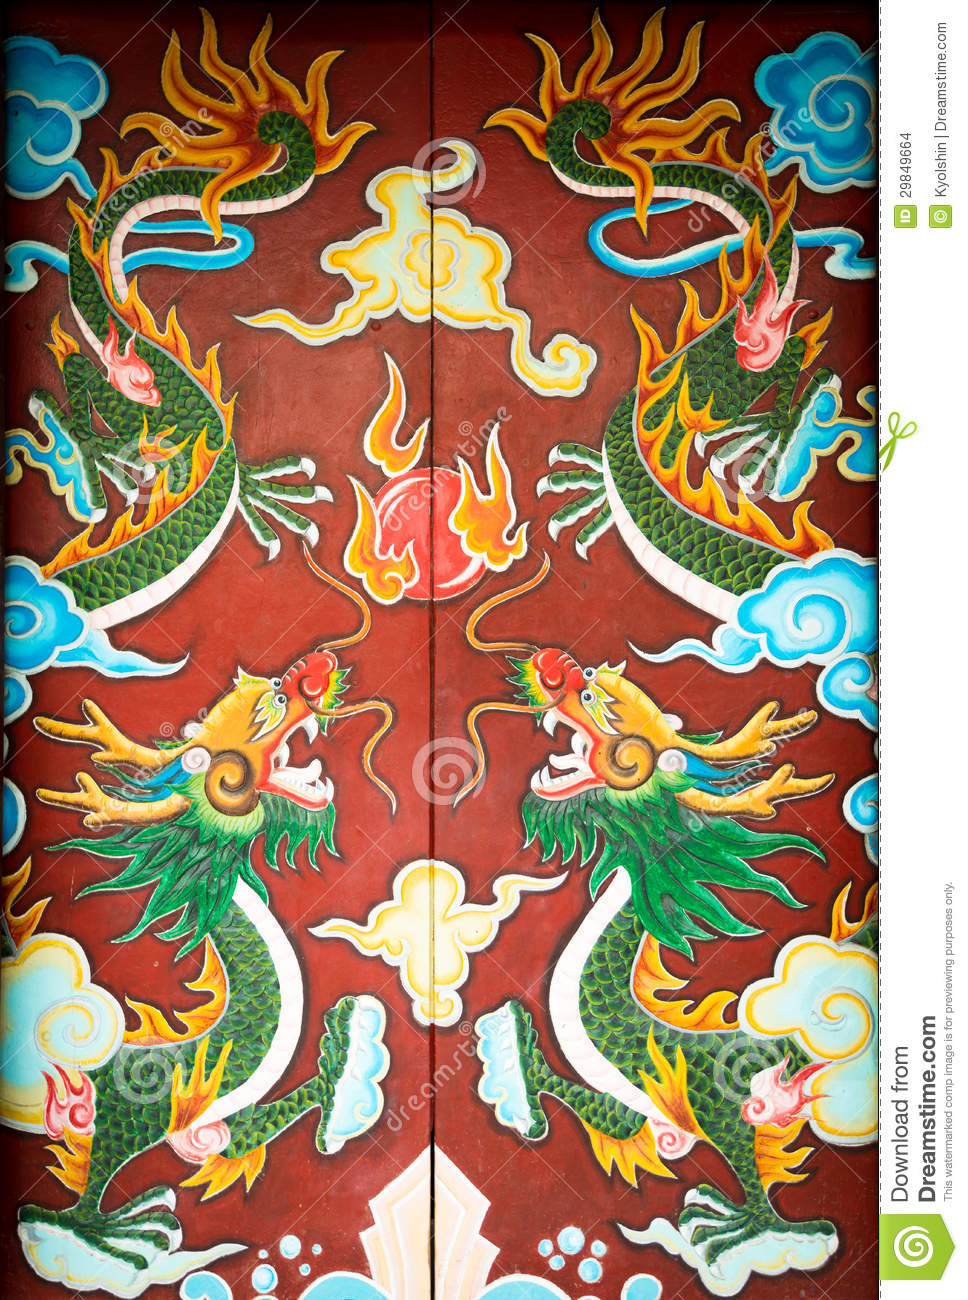 Colorful Door With Symmetrical Dragon Painting  Stock Images   Image